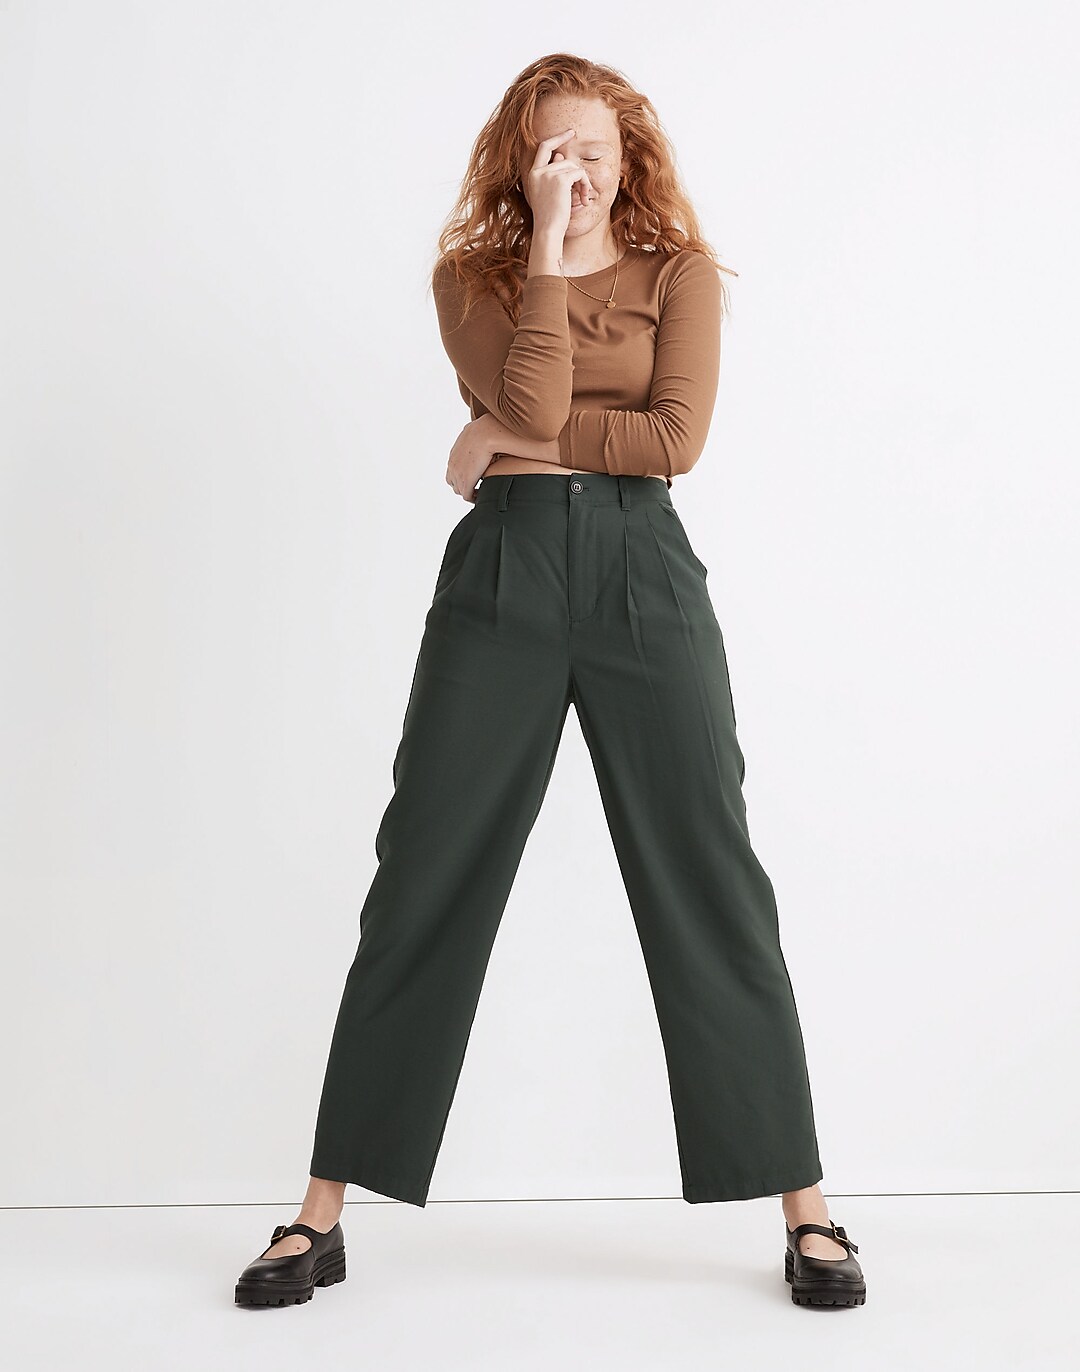 These Madewell Trousers Are the Only Real Pants I'll Wear While